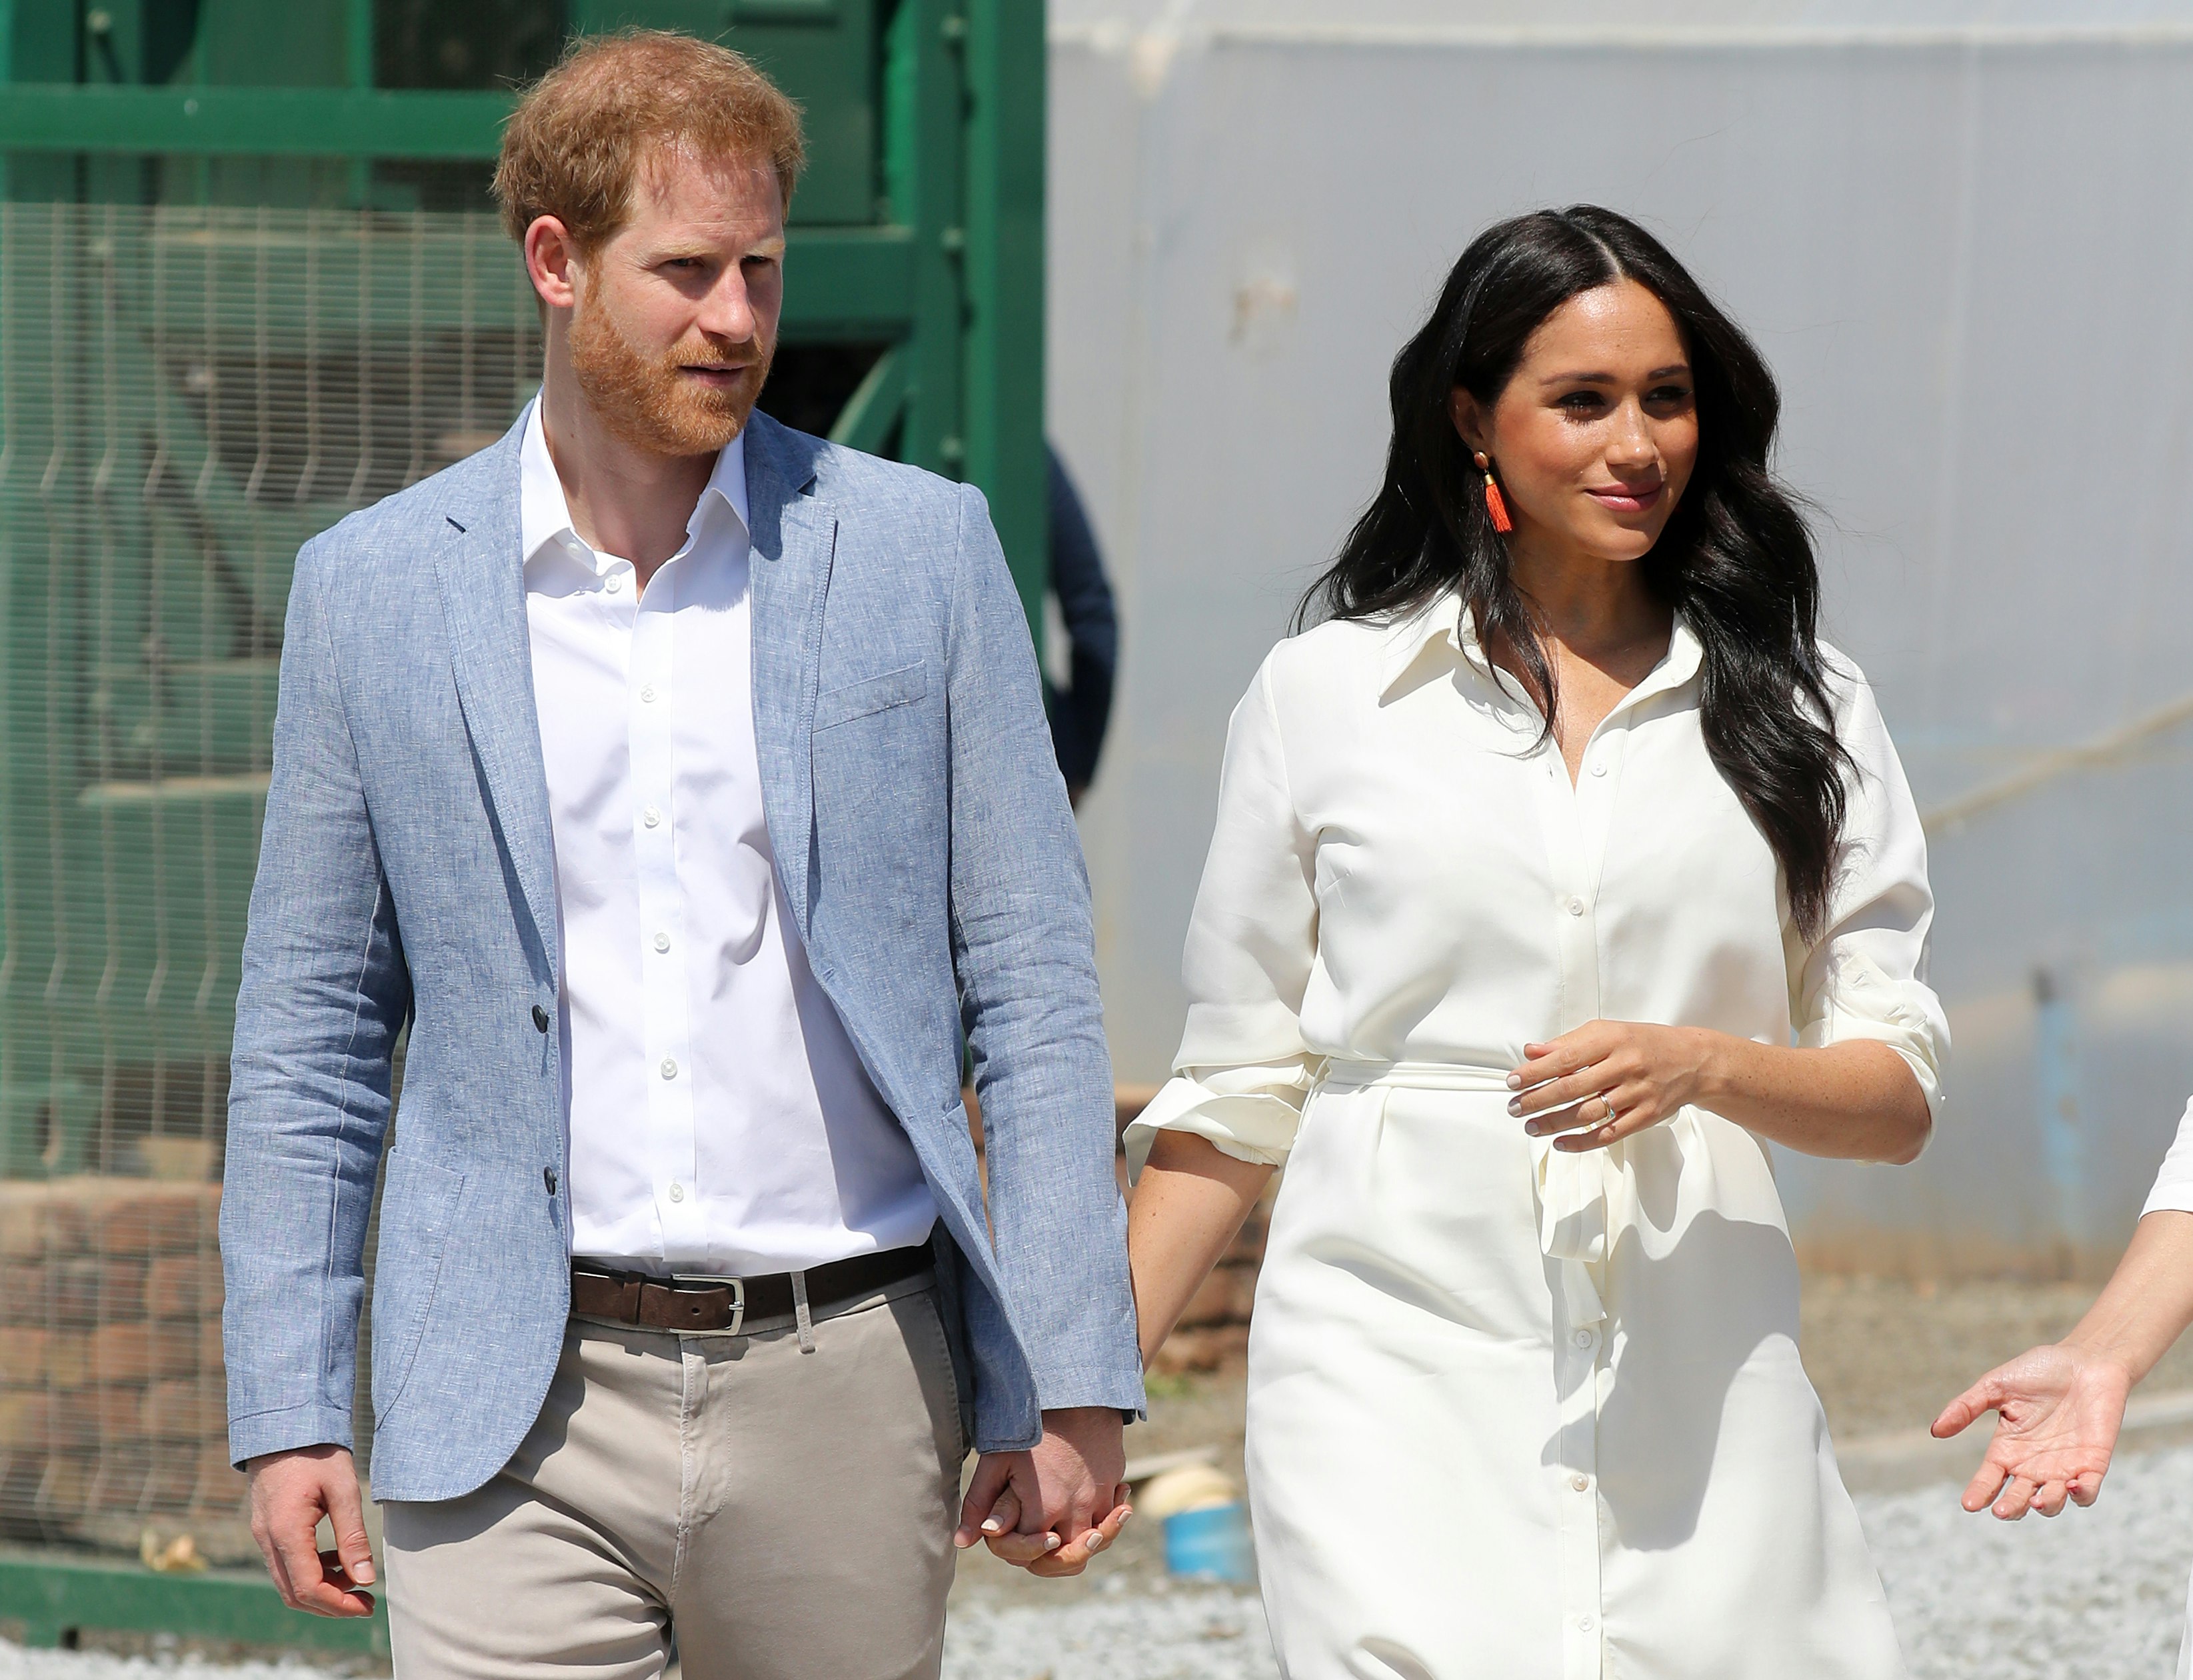 Prince Harry and Meghan Markle olds hands while visiting a Youth Employment Service building in South Africa.